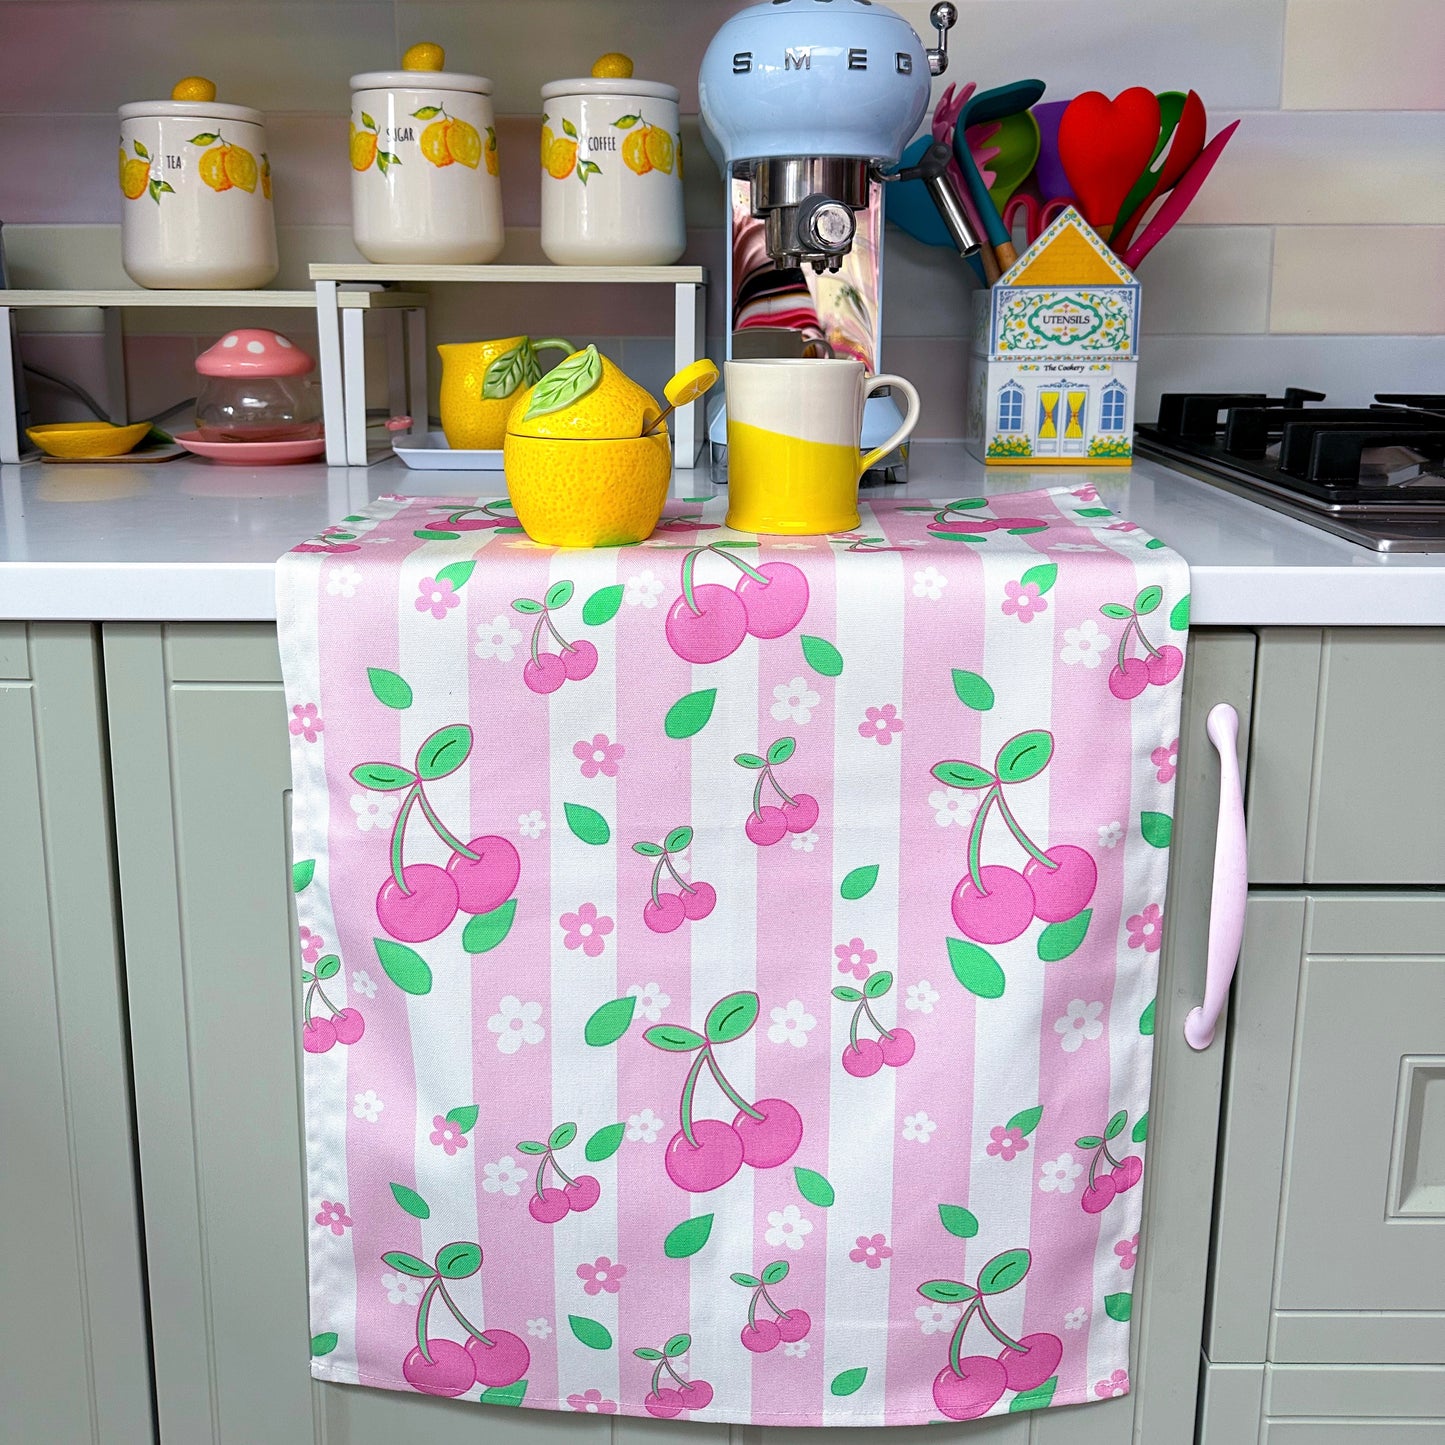 pink striped kitchen towel with cherries